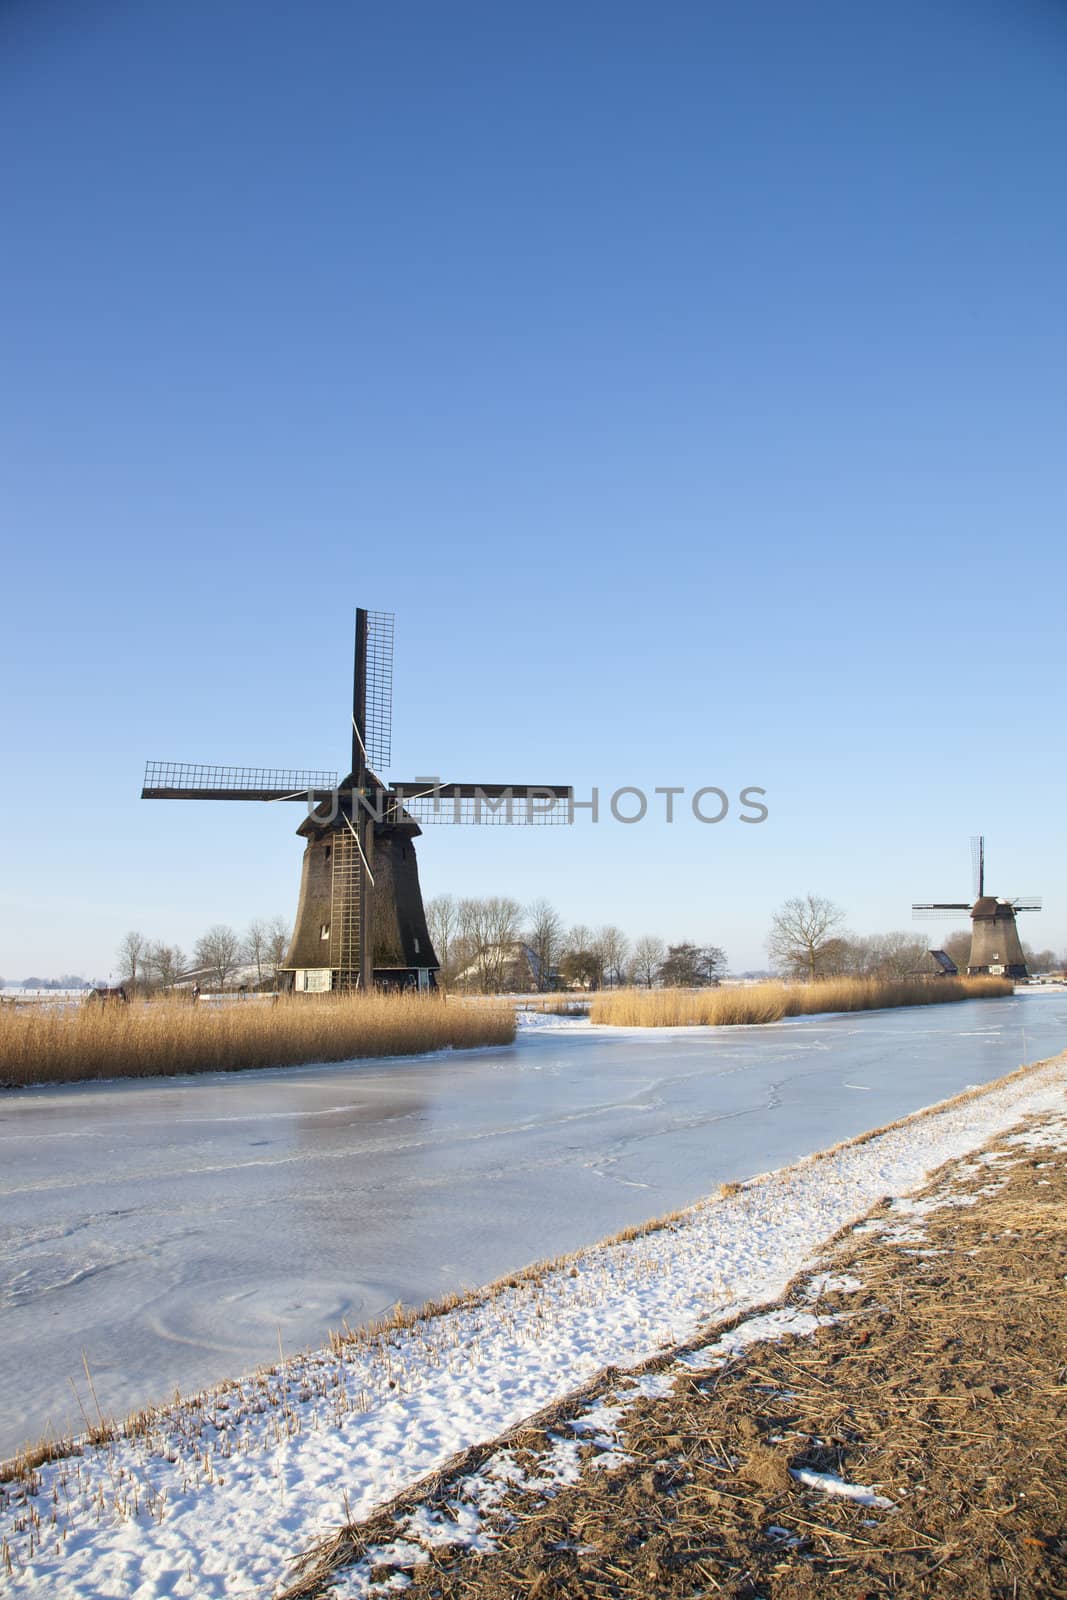 Two windmills in winter time with snow, ice and blue sky